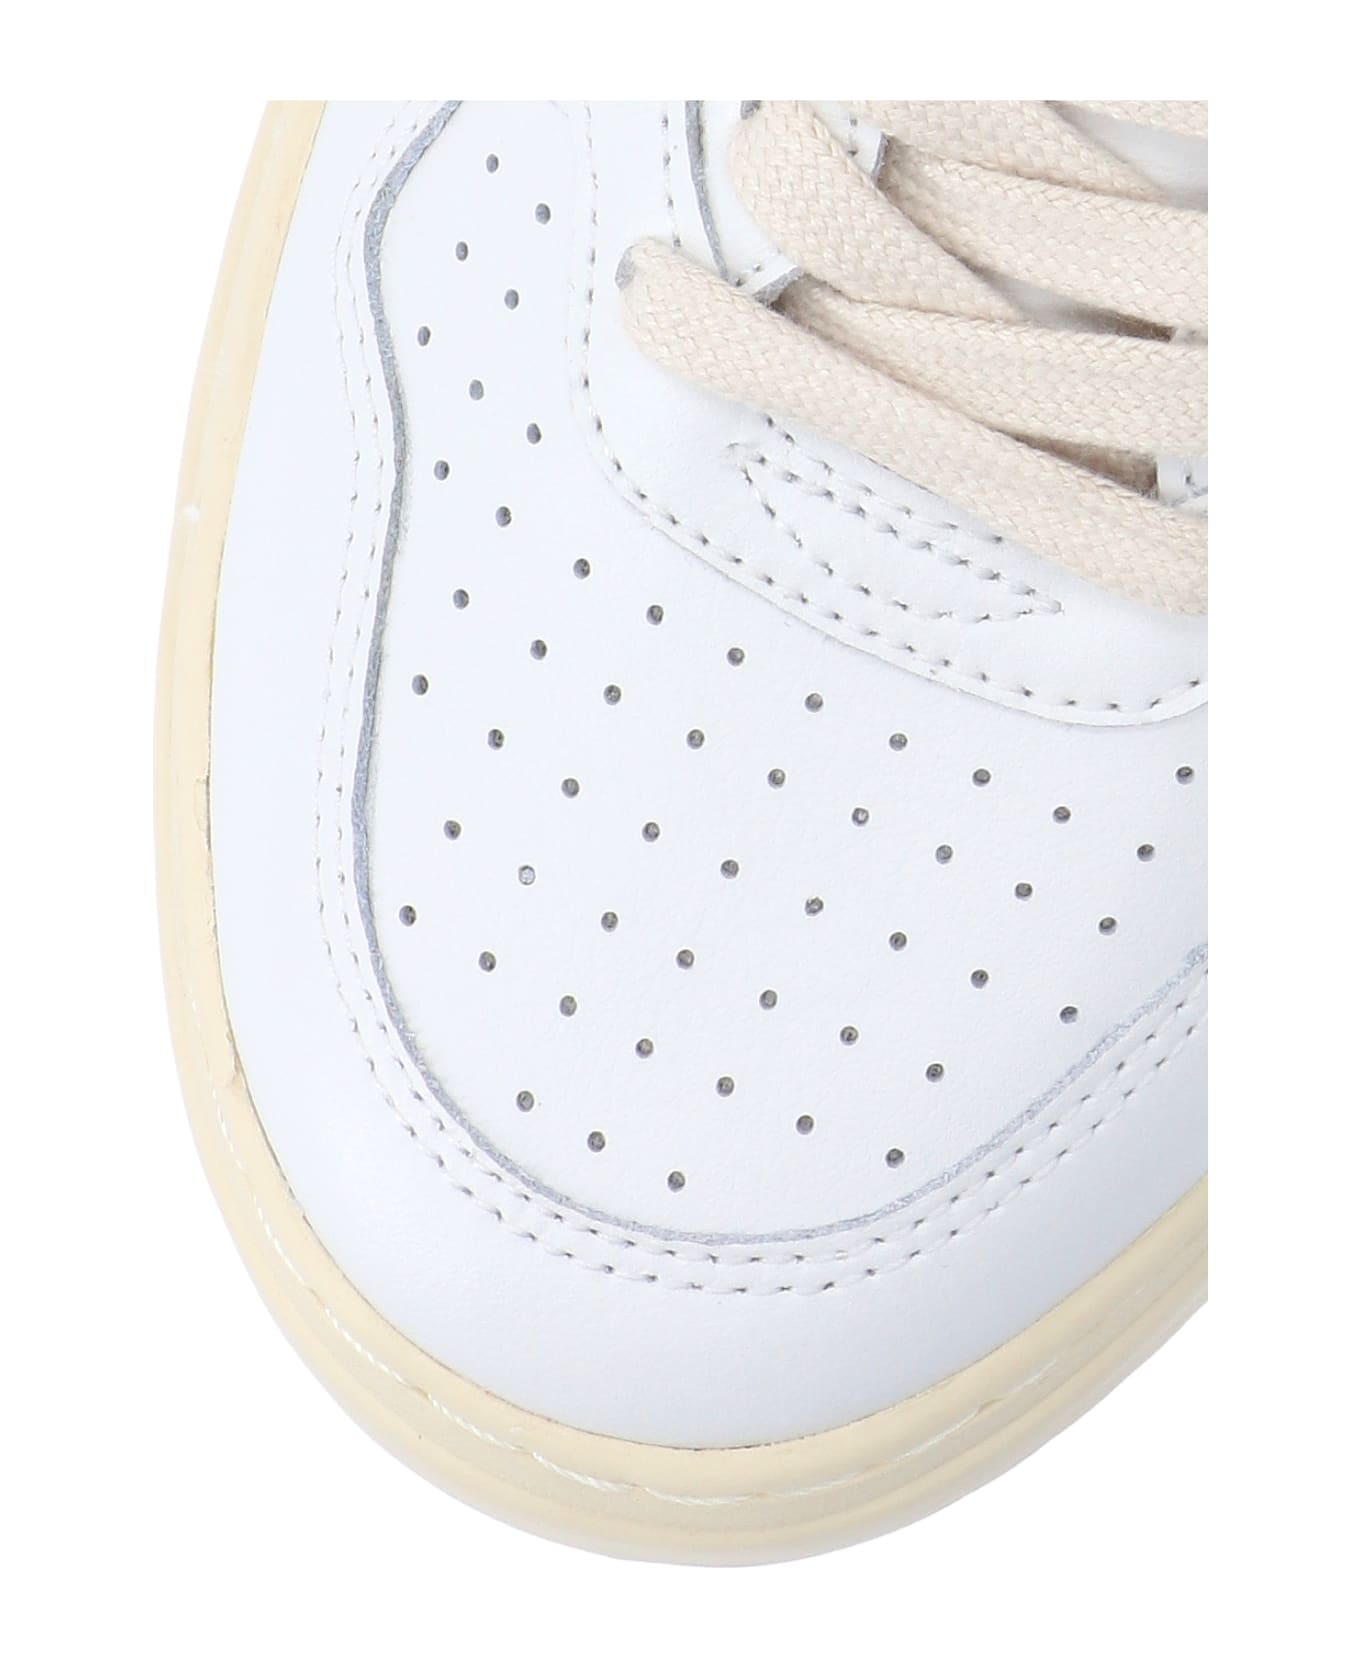 Autry Low Sneakers 'medalist' - White Red スニーカー